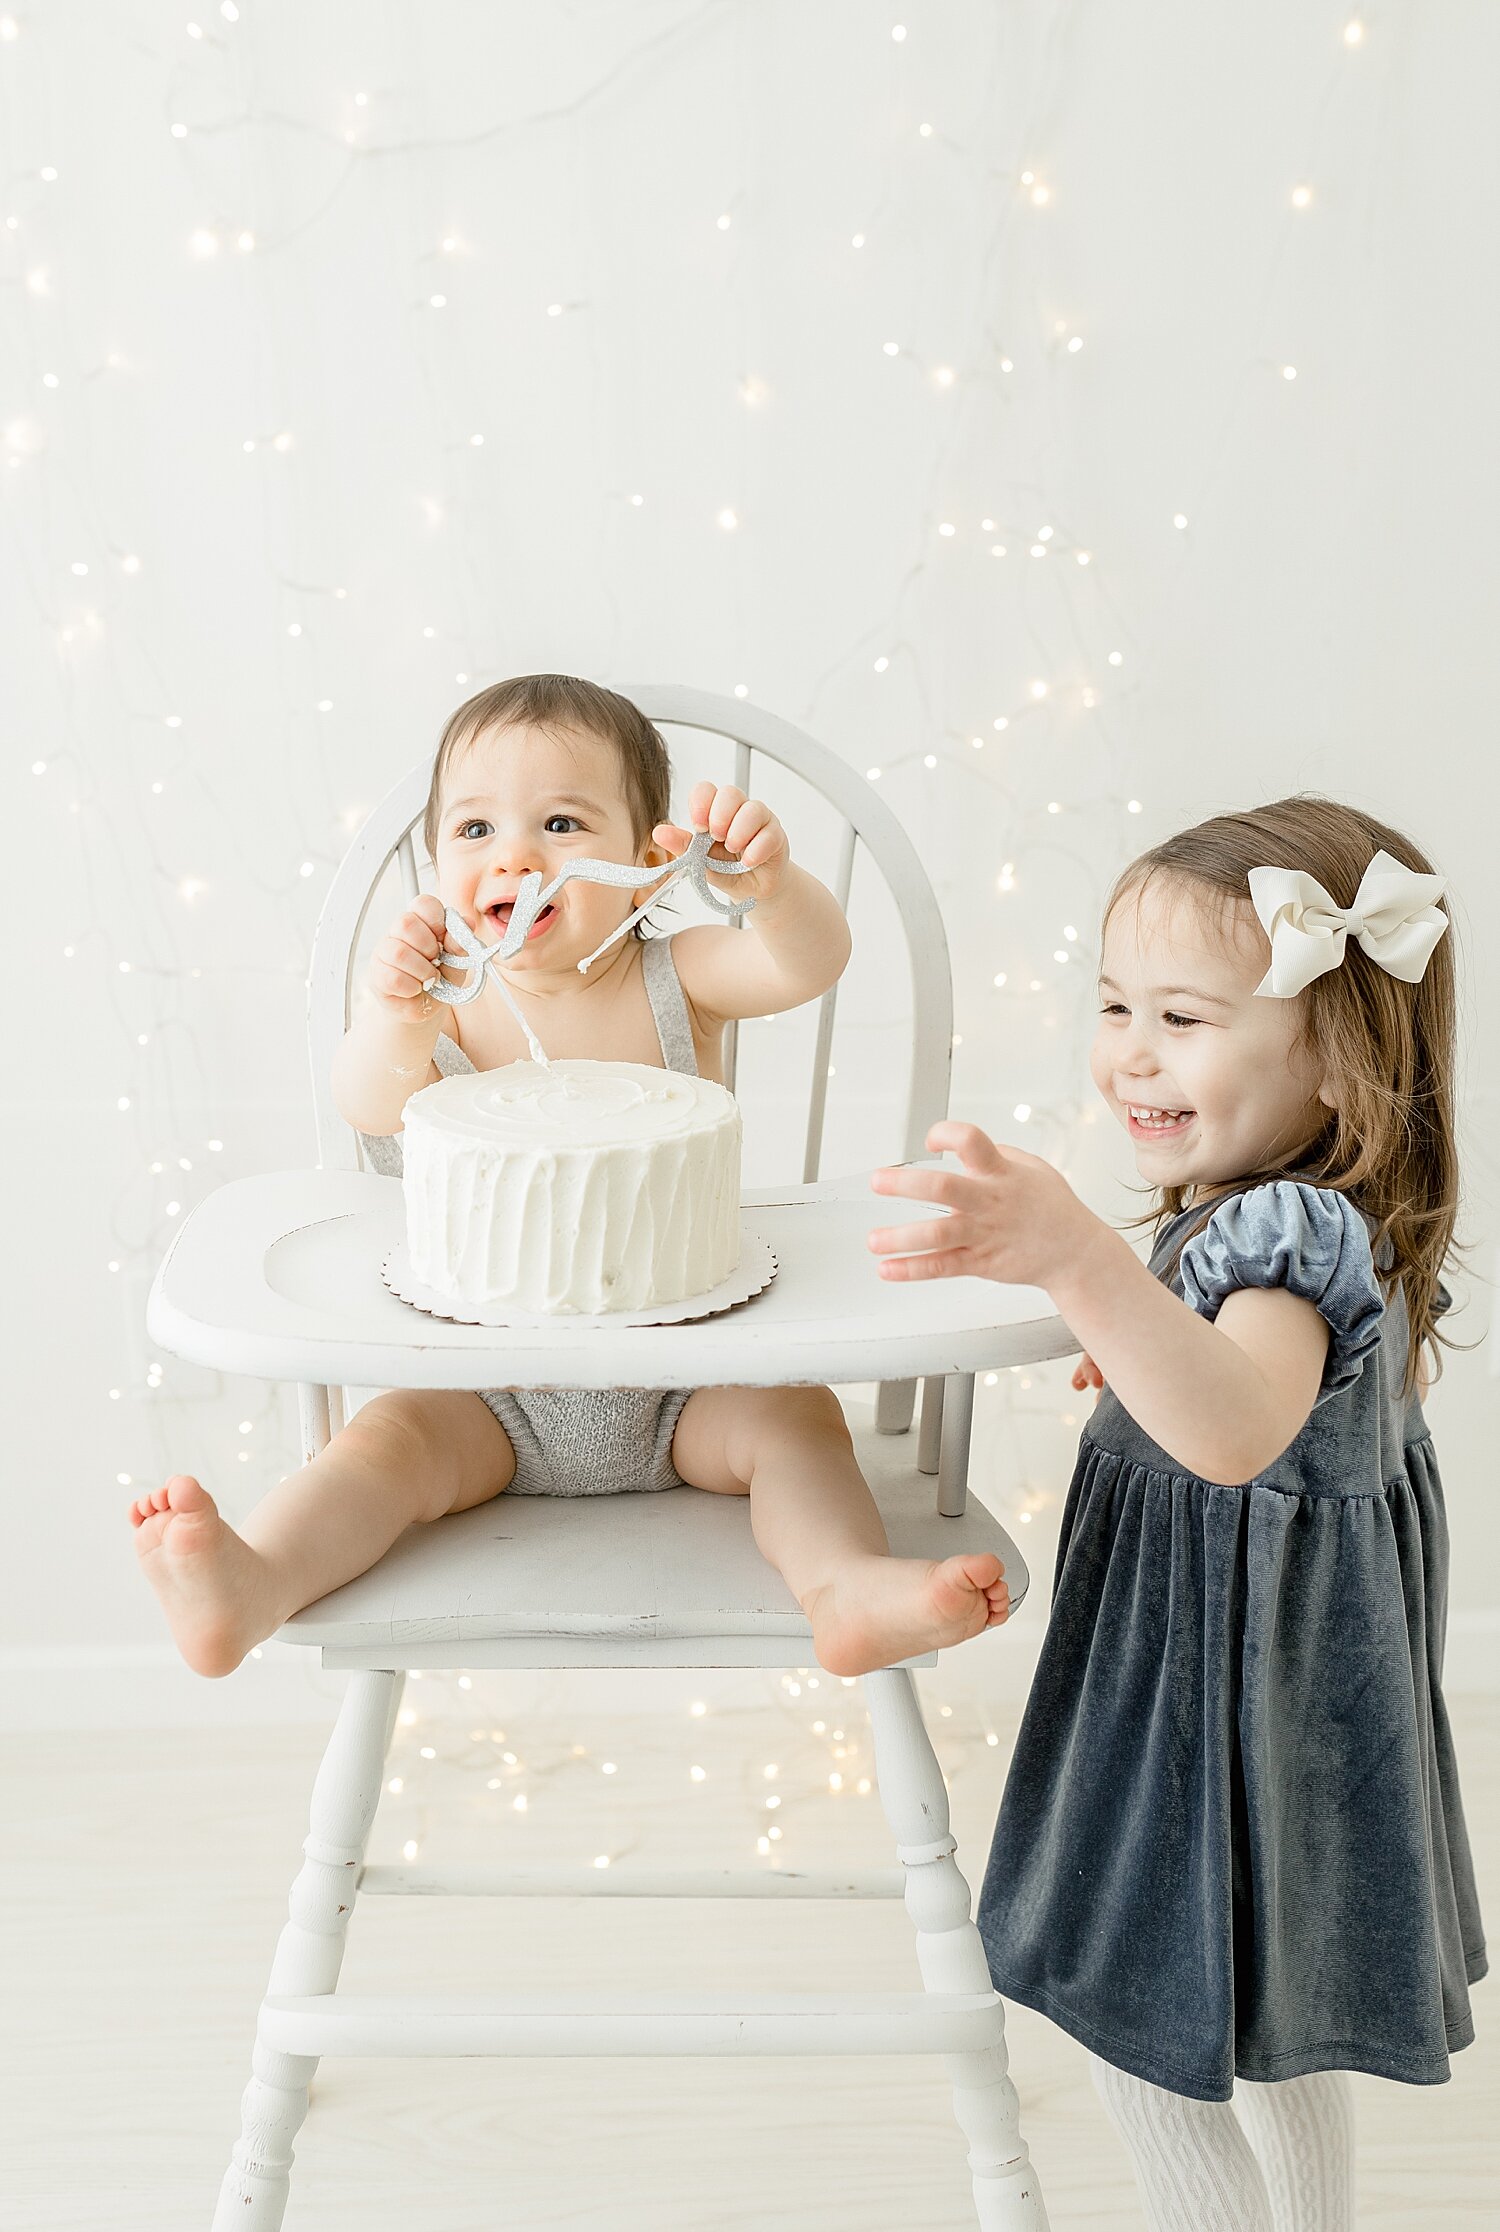 Big sister standing by her brother during cake smash photoshoot with Kristin Wood Photography.